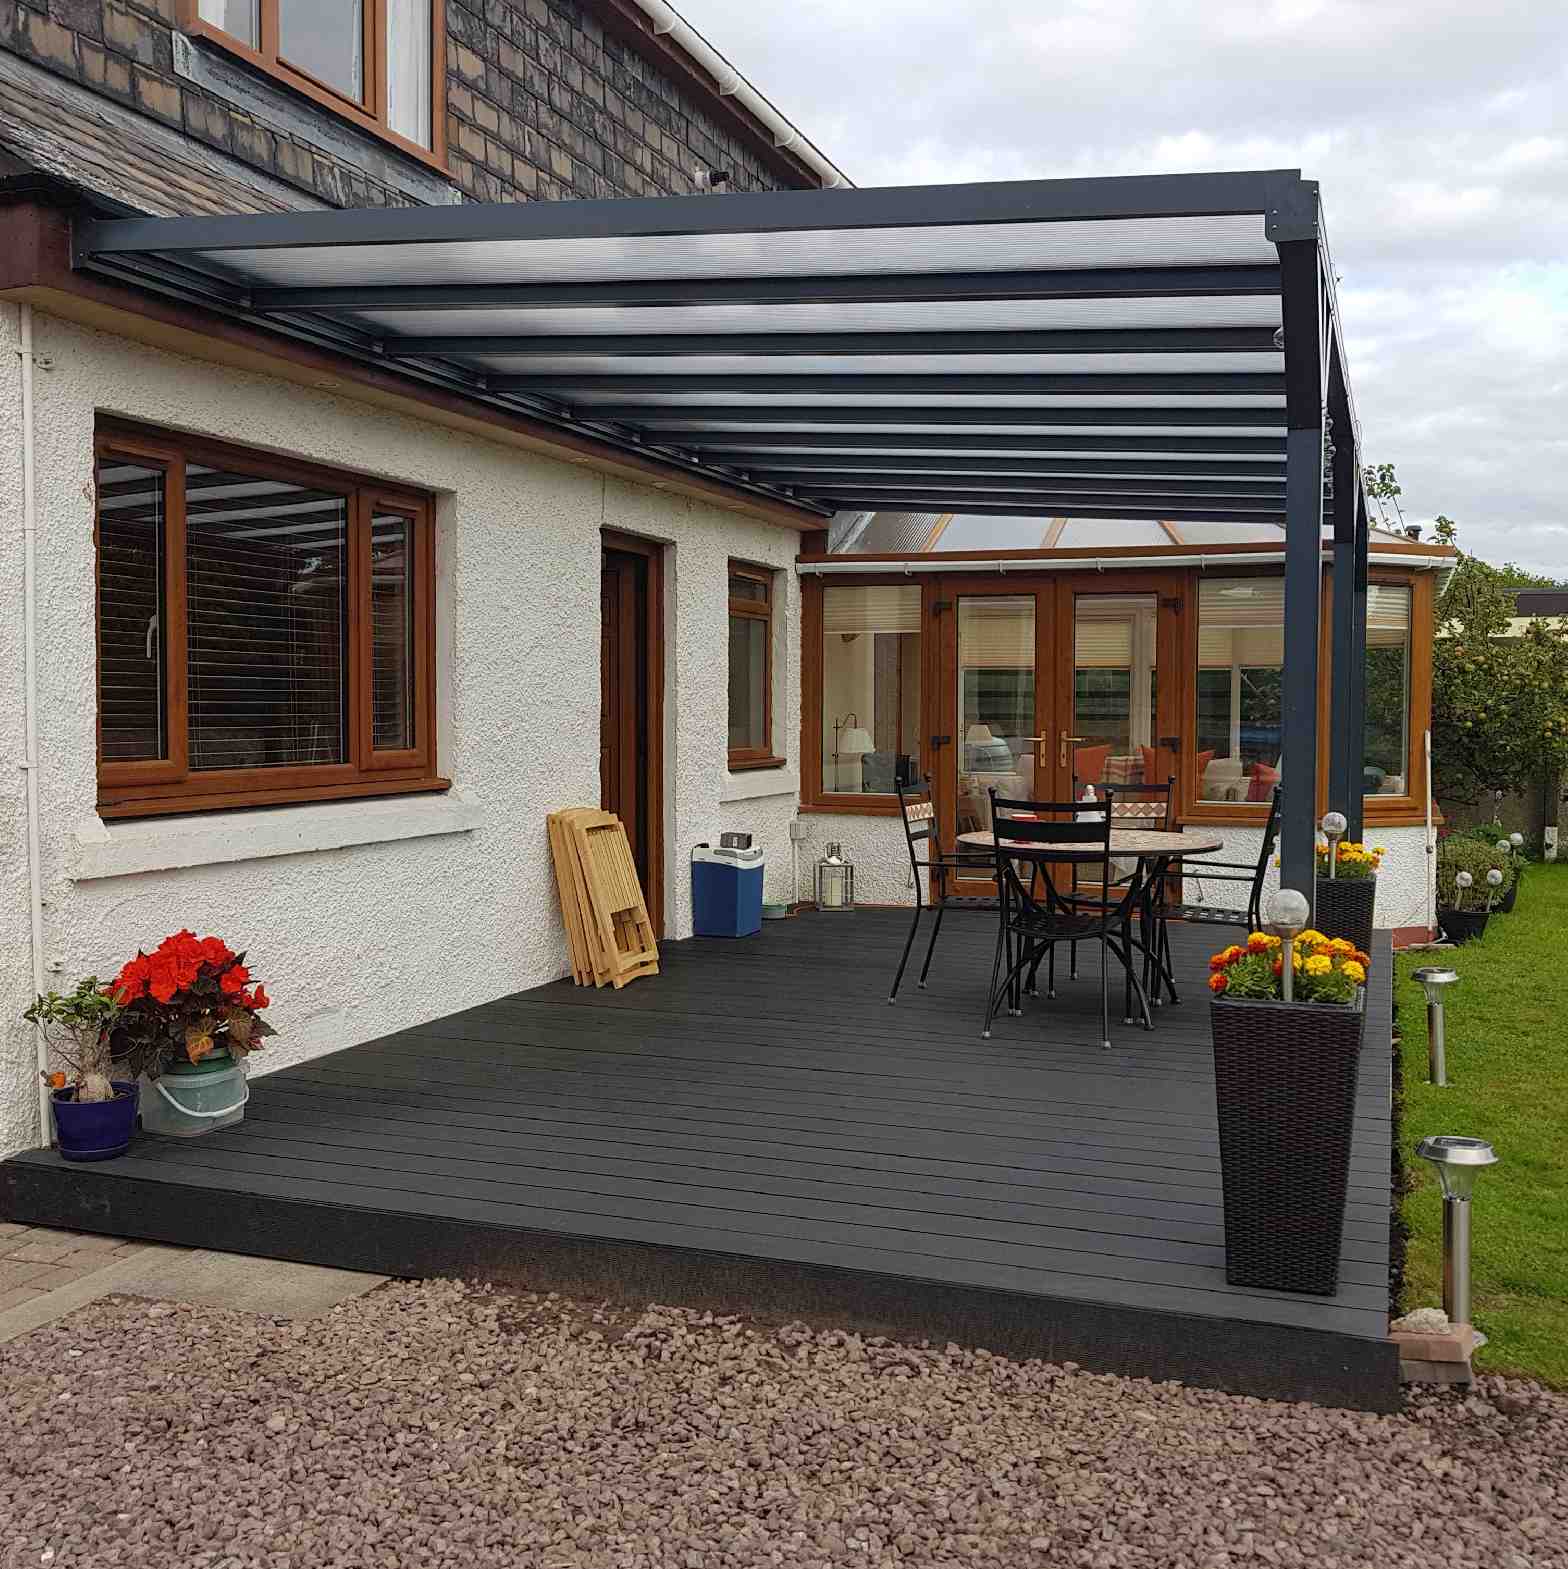 Buy Omega Verandah, Anthracite Grey, 16mm Polycarbonate Glazing - 7.8m (W) x 4.0m (P), (4) Supporting Posts online today